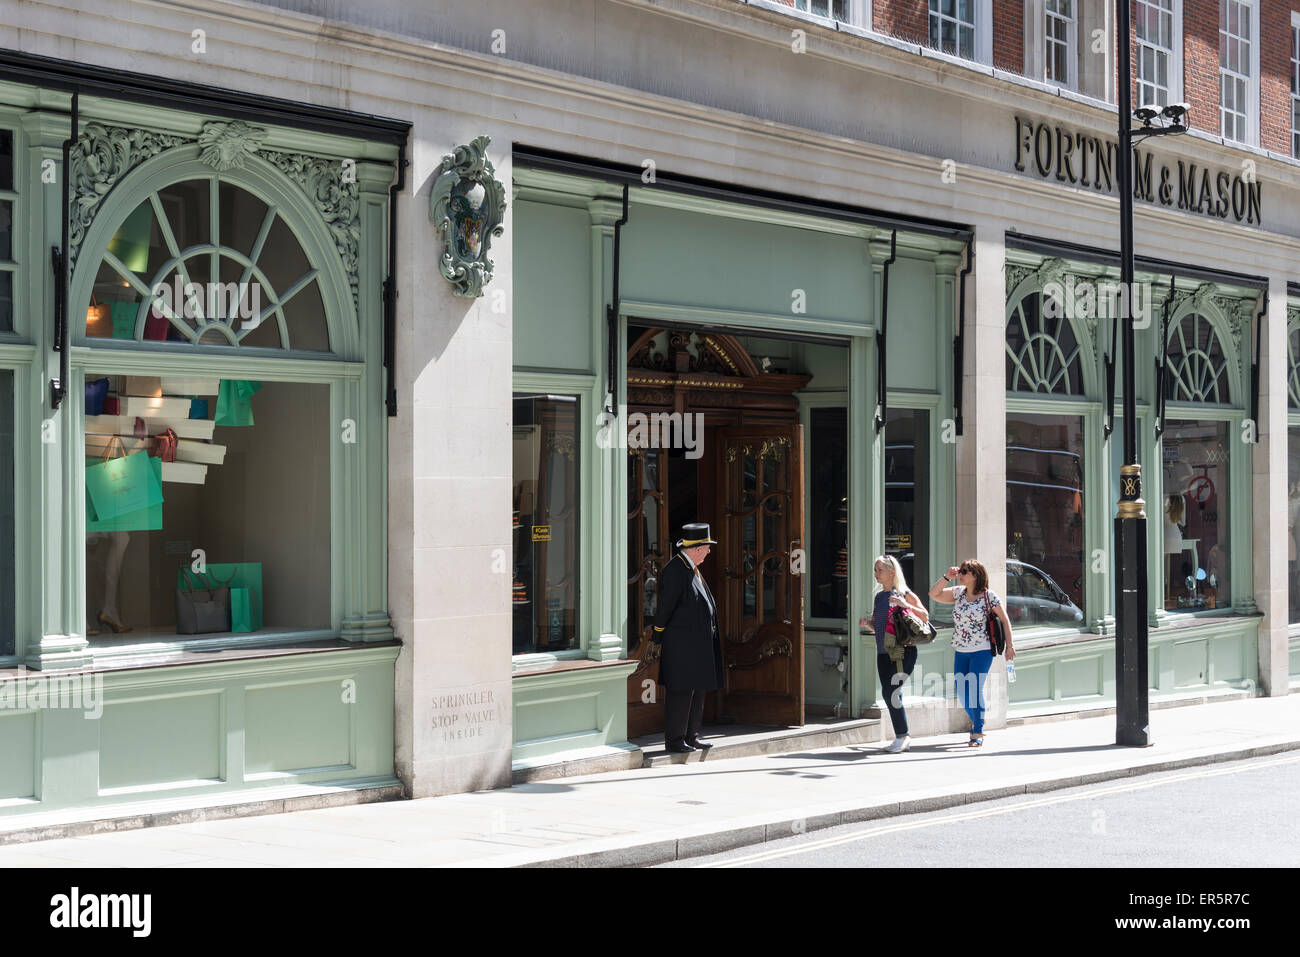 Portiere ad ingresso a Fortnum & Mason Department Store, Piccadilly, City of Westminster, Londra, Inghilterra, Regno Unito Foto Stock